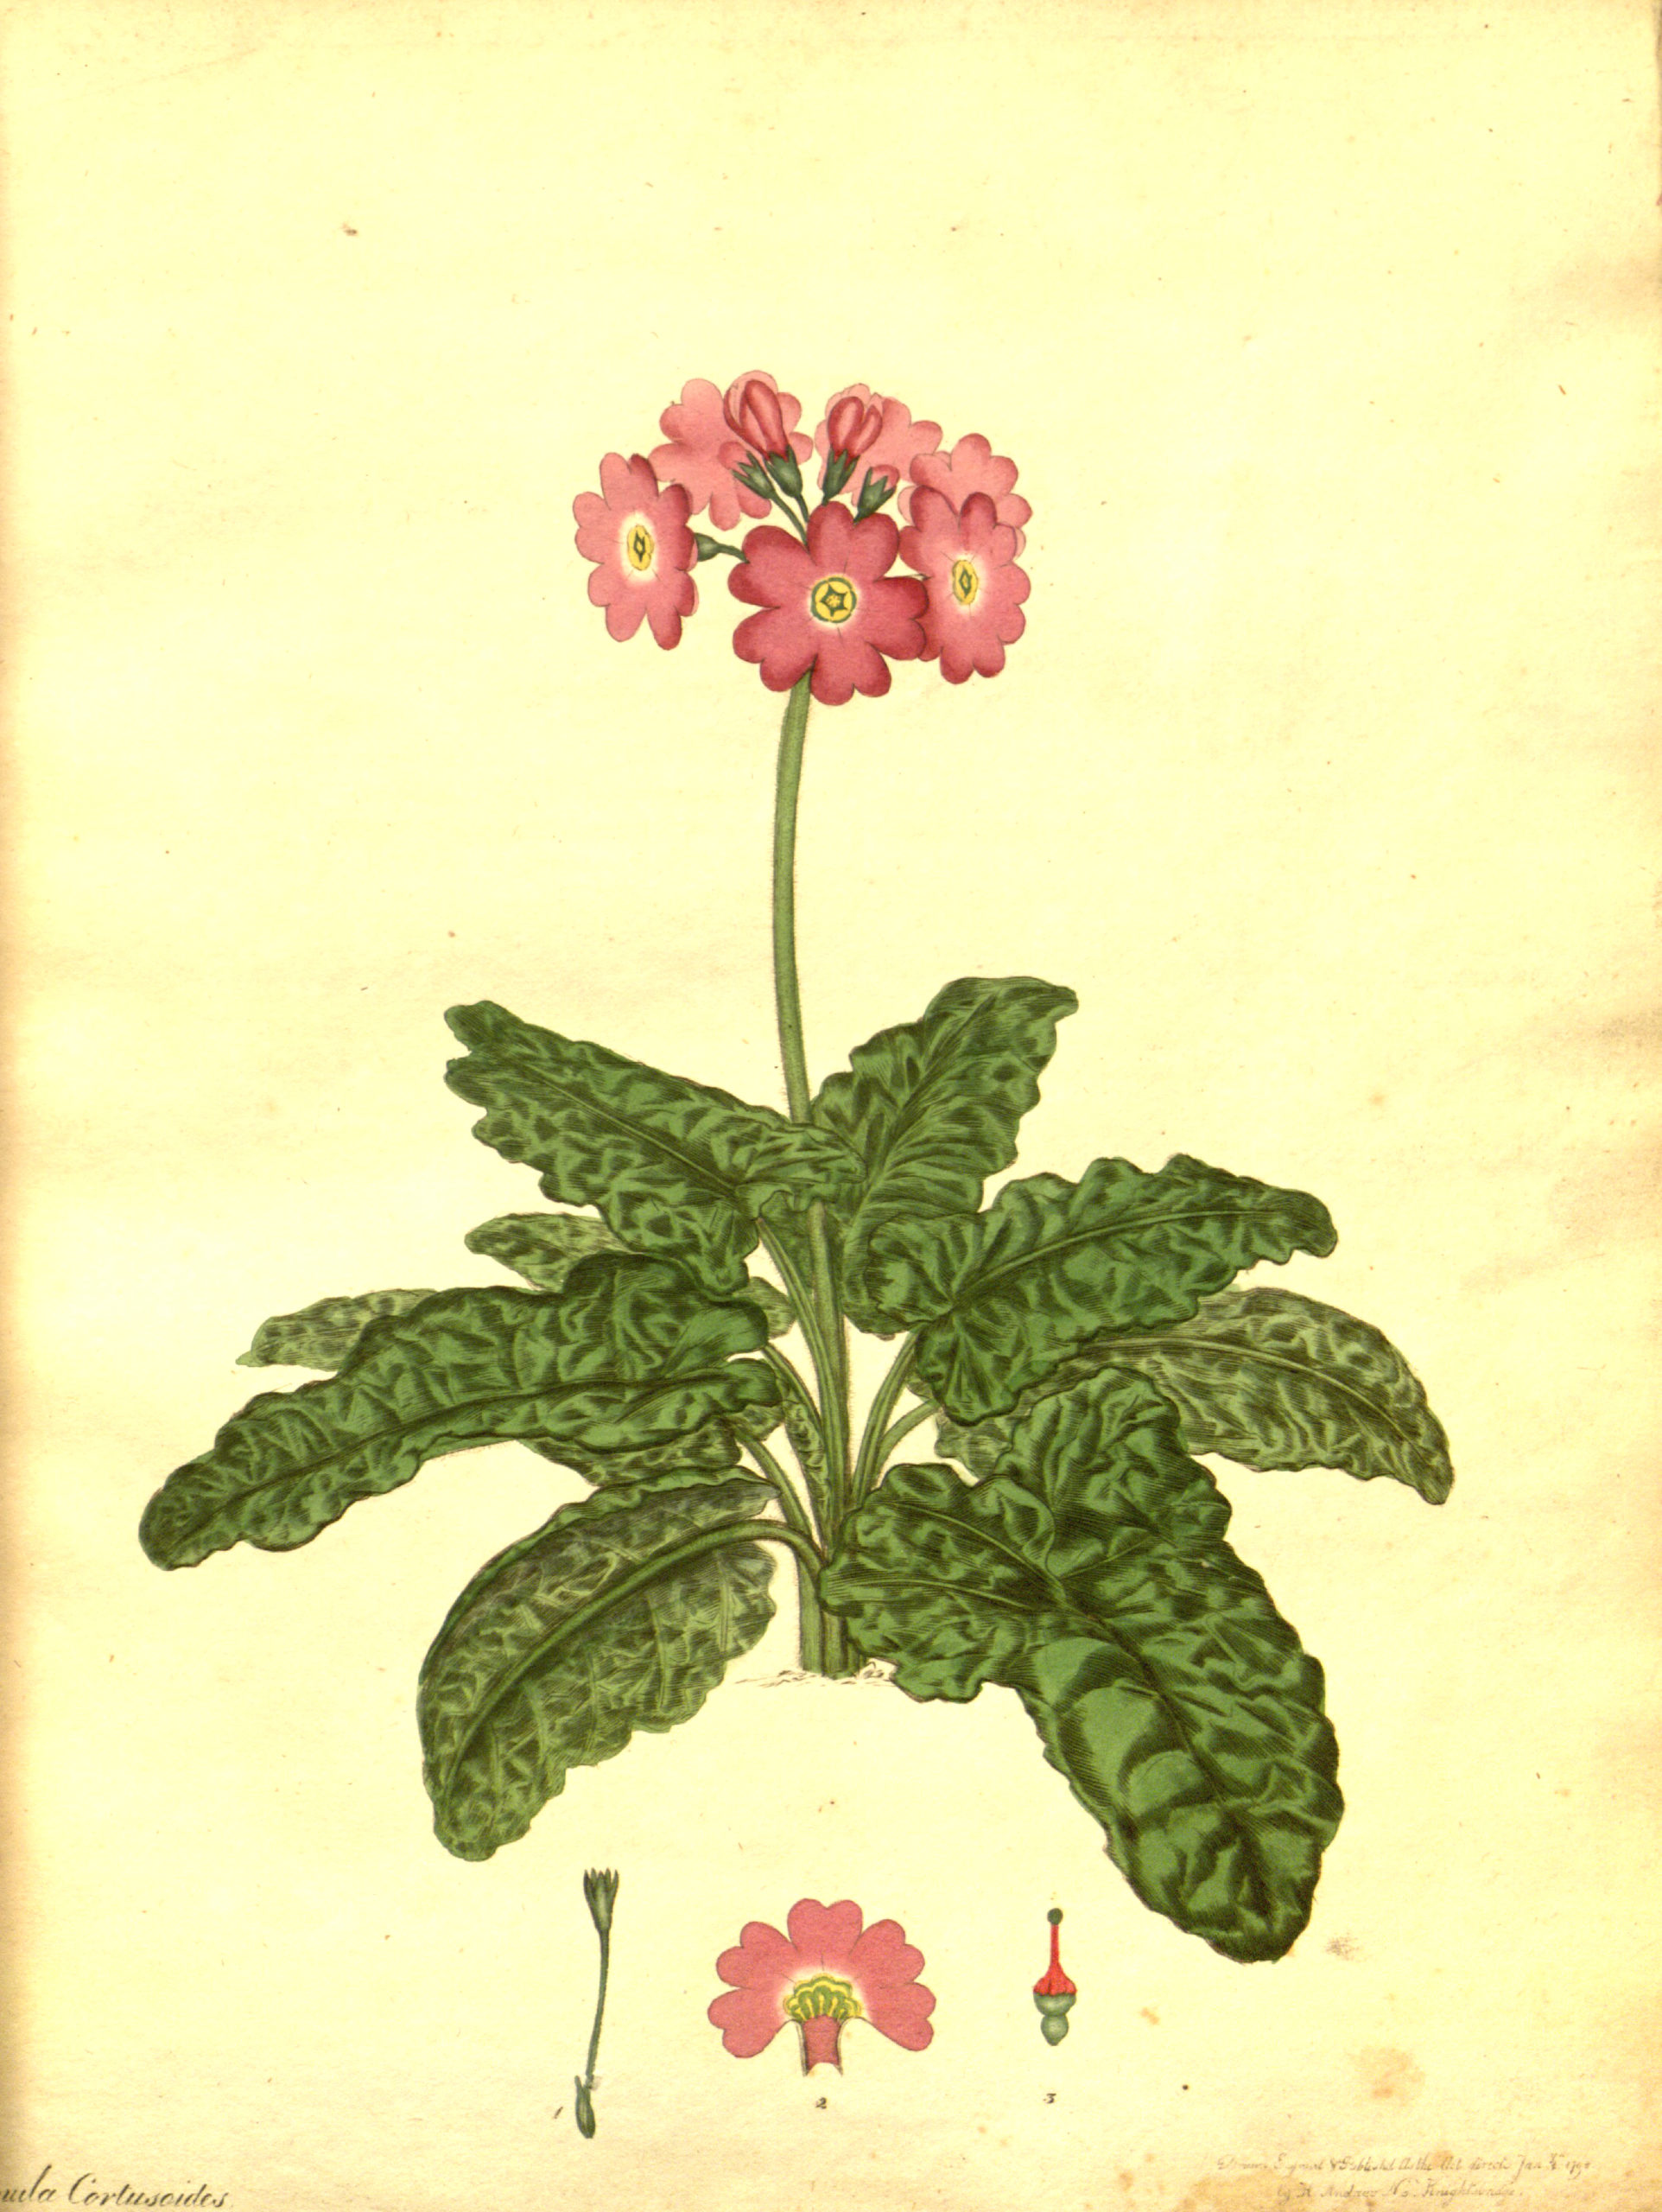 Vintage Botanical Prints - 69 in a series - Primula Cortusoides from The botanist's repository (1797)